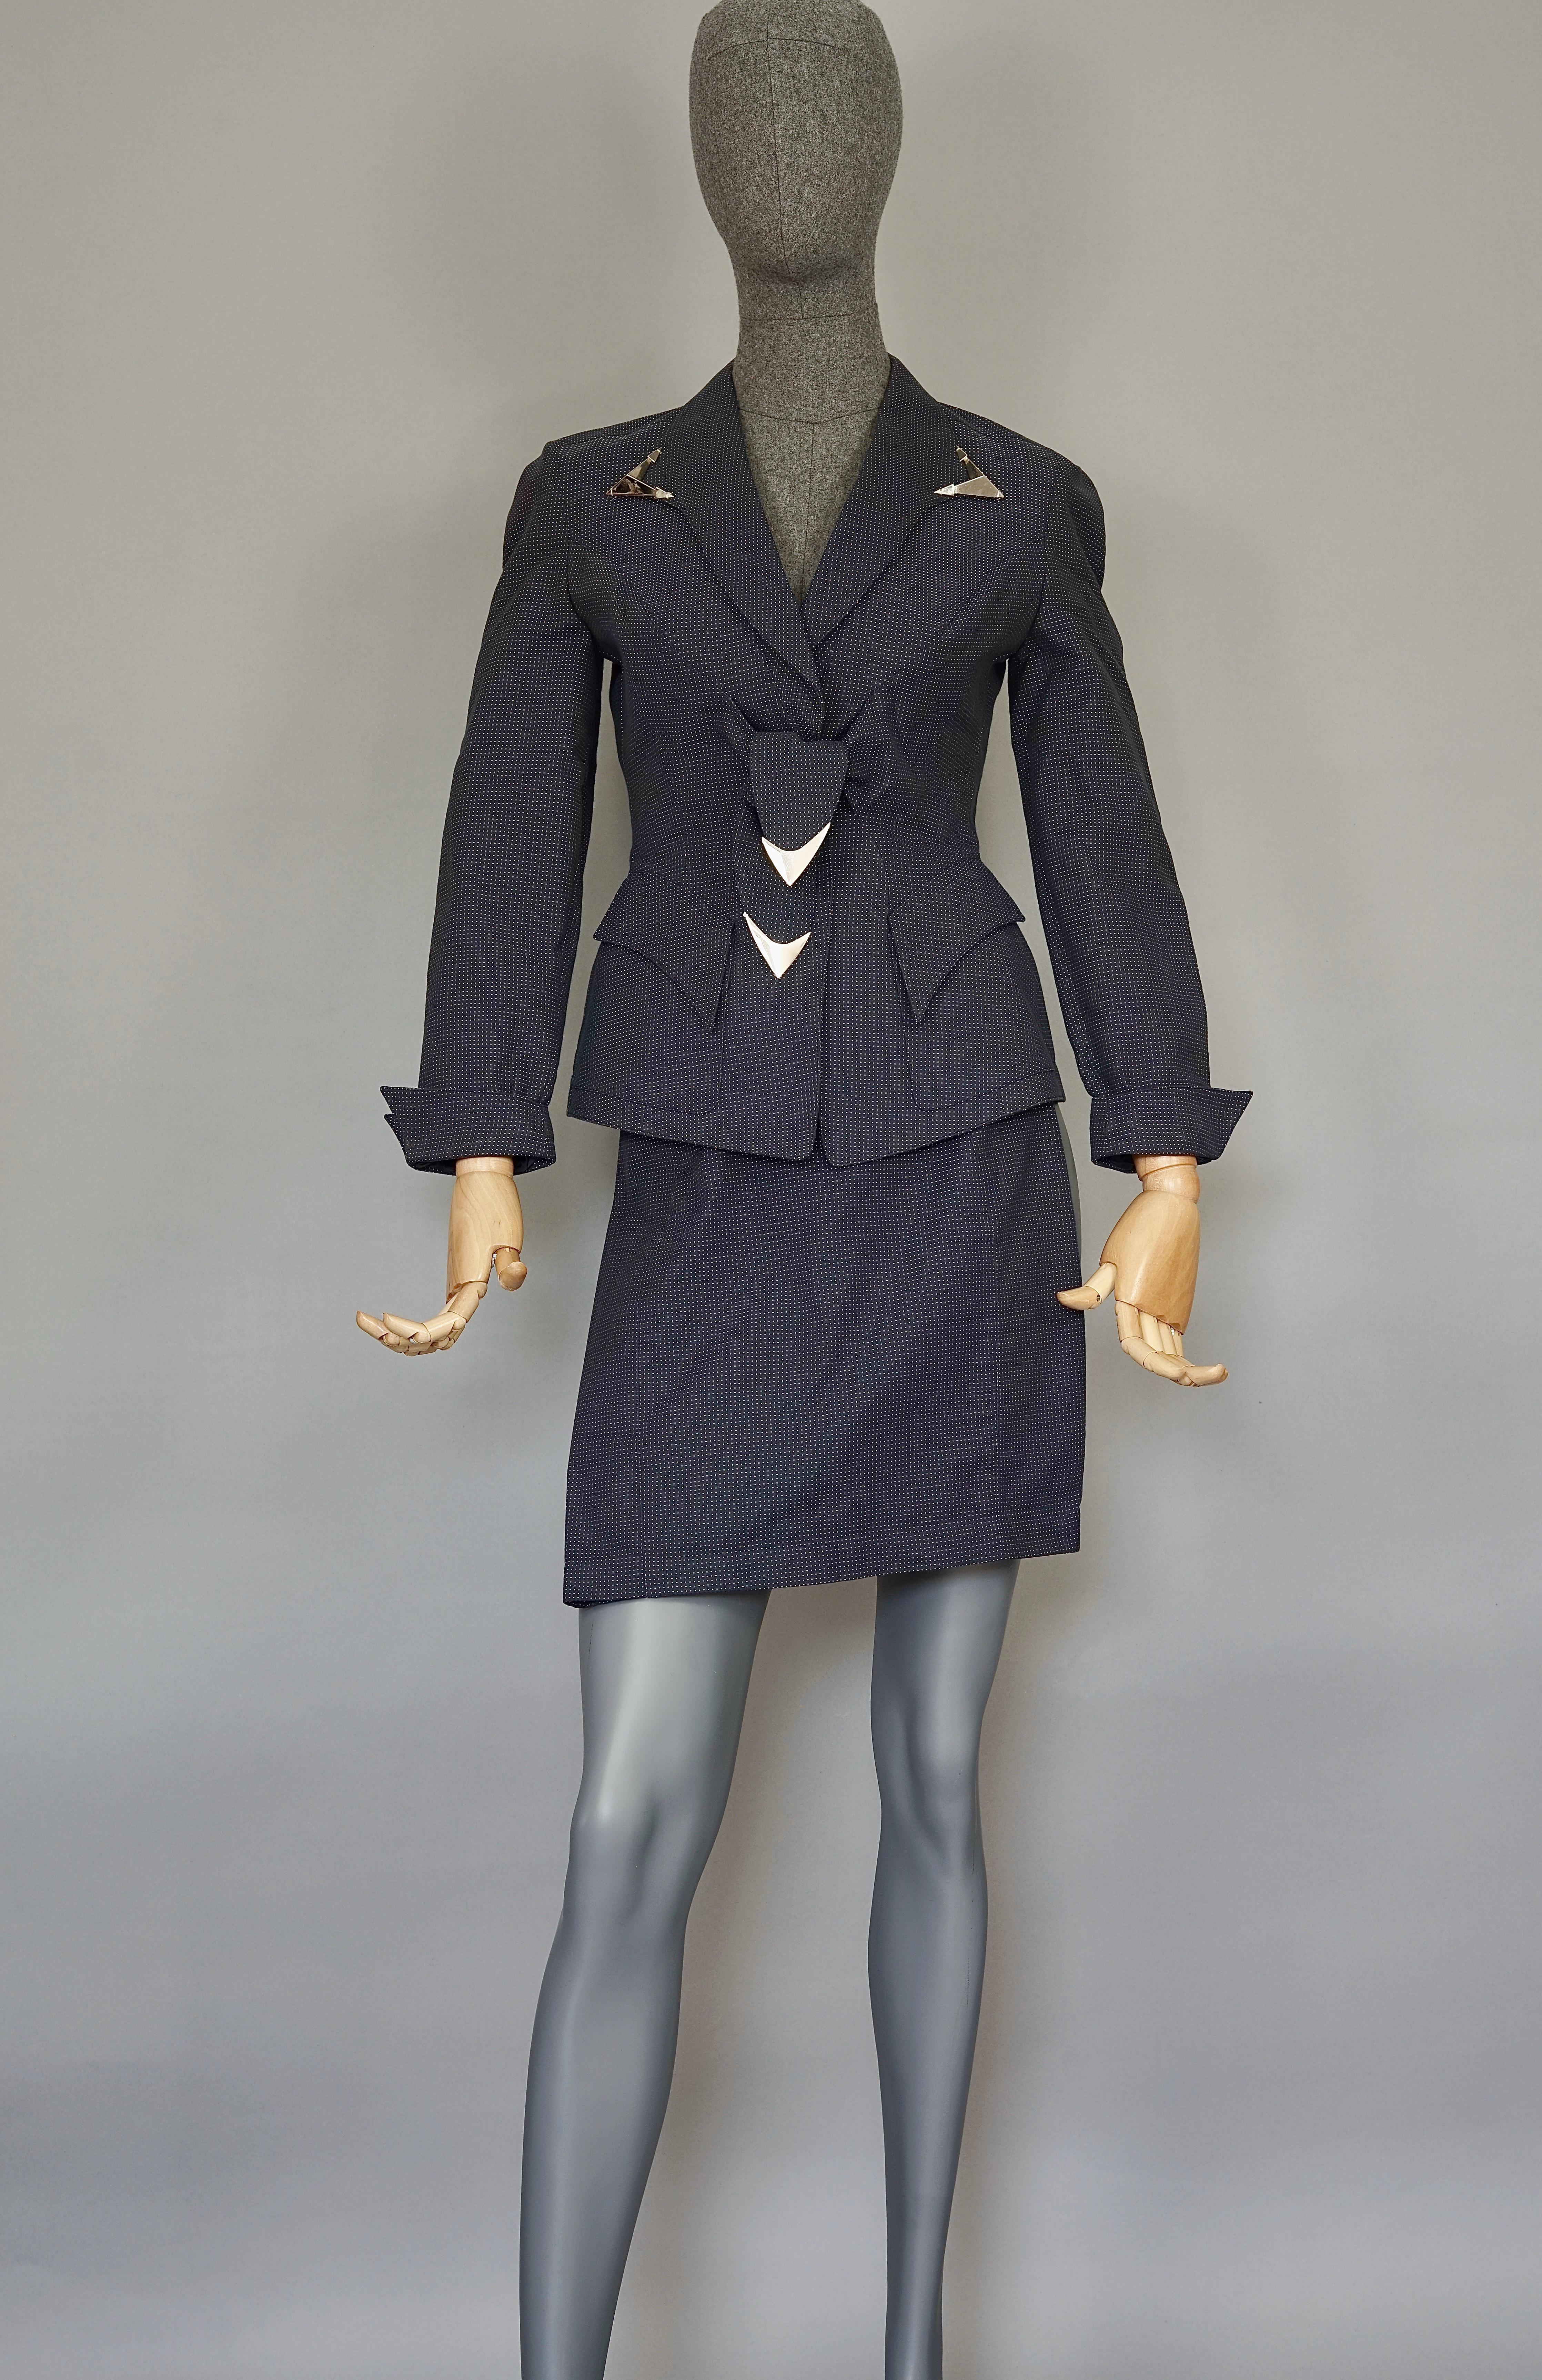 Vintage THIERRY MUGLER Metal Appliques Bow Polka Dot Jacket Skirt Suit

Measurements taken laid flat, please double bust, waist and hips :
JACKET/ BLAZER
Shoulders: 15.55 inches (39.5 cm)
Sleeves: 22.44 inches (57 cm)
Bust: 16.53 inches (42